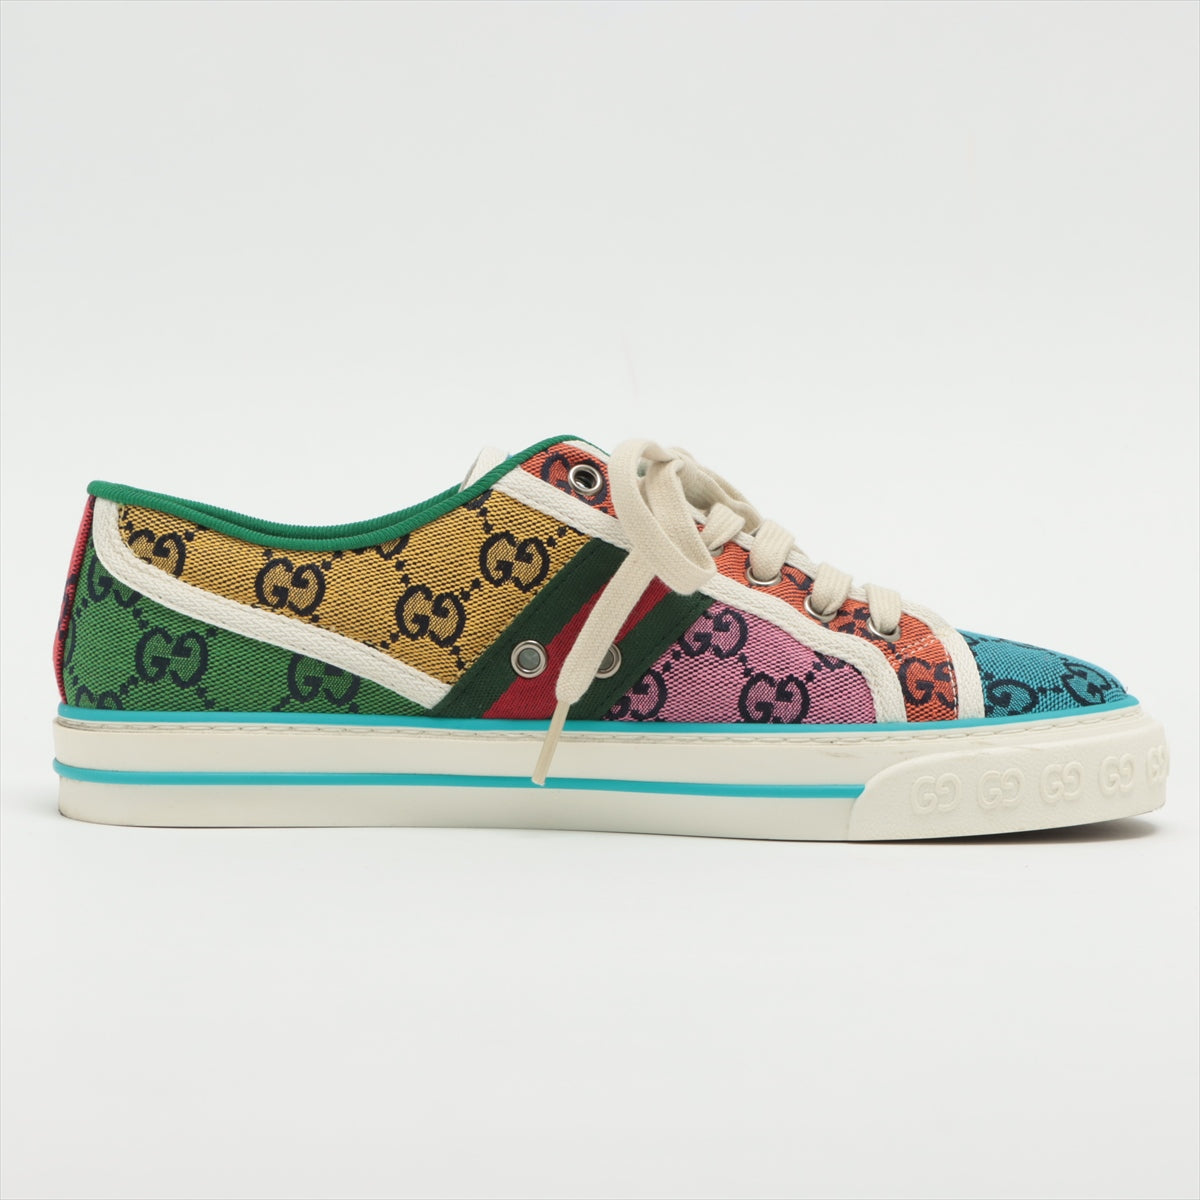 Gucci GG canvass Sneakers 39+ Ladies' Multicolor Tennis 1977